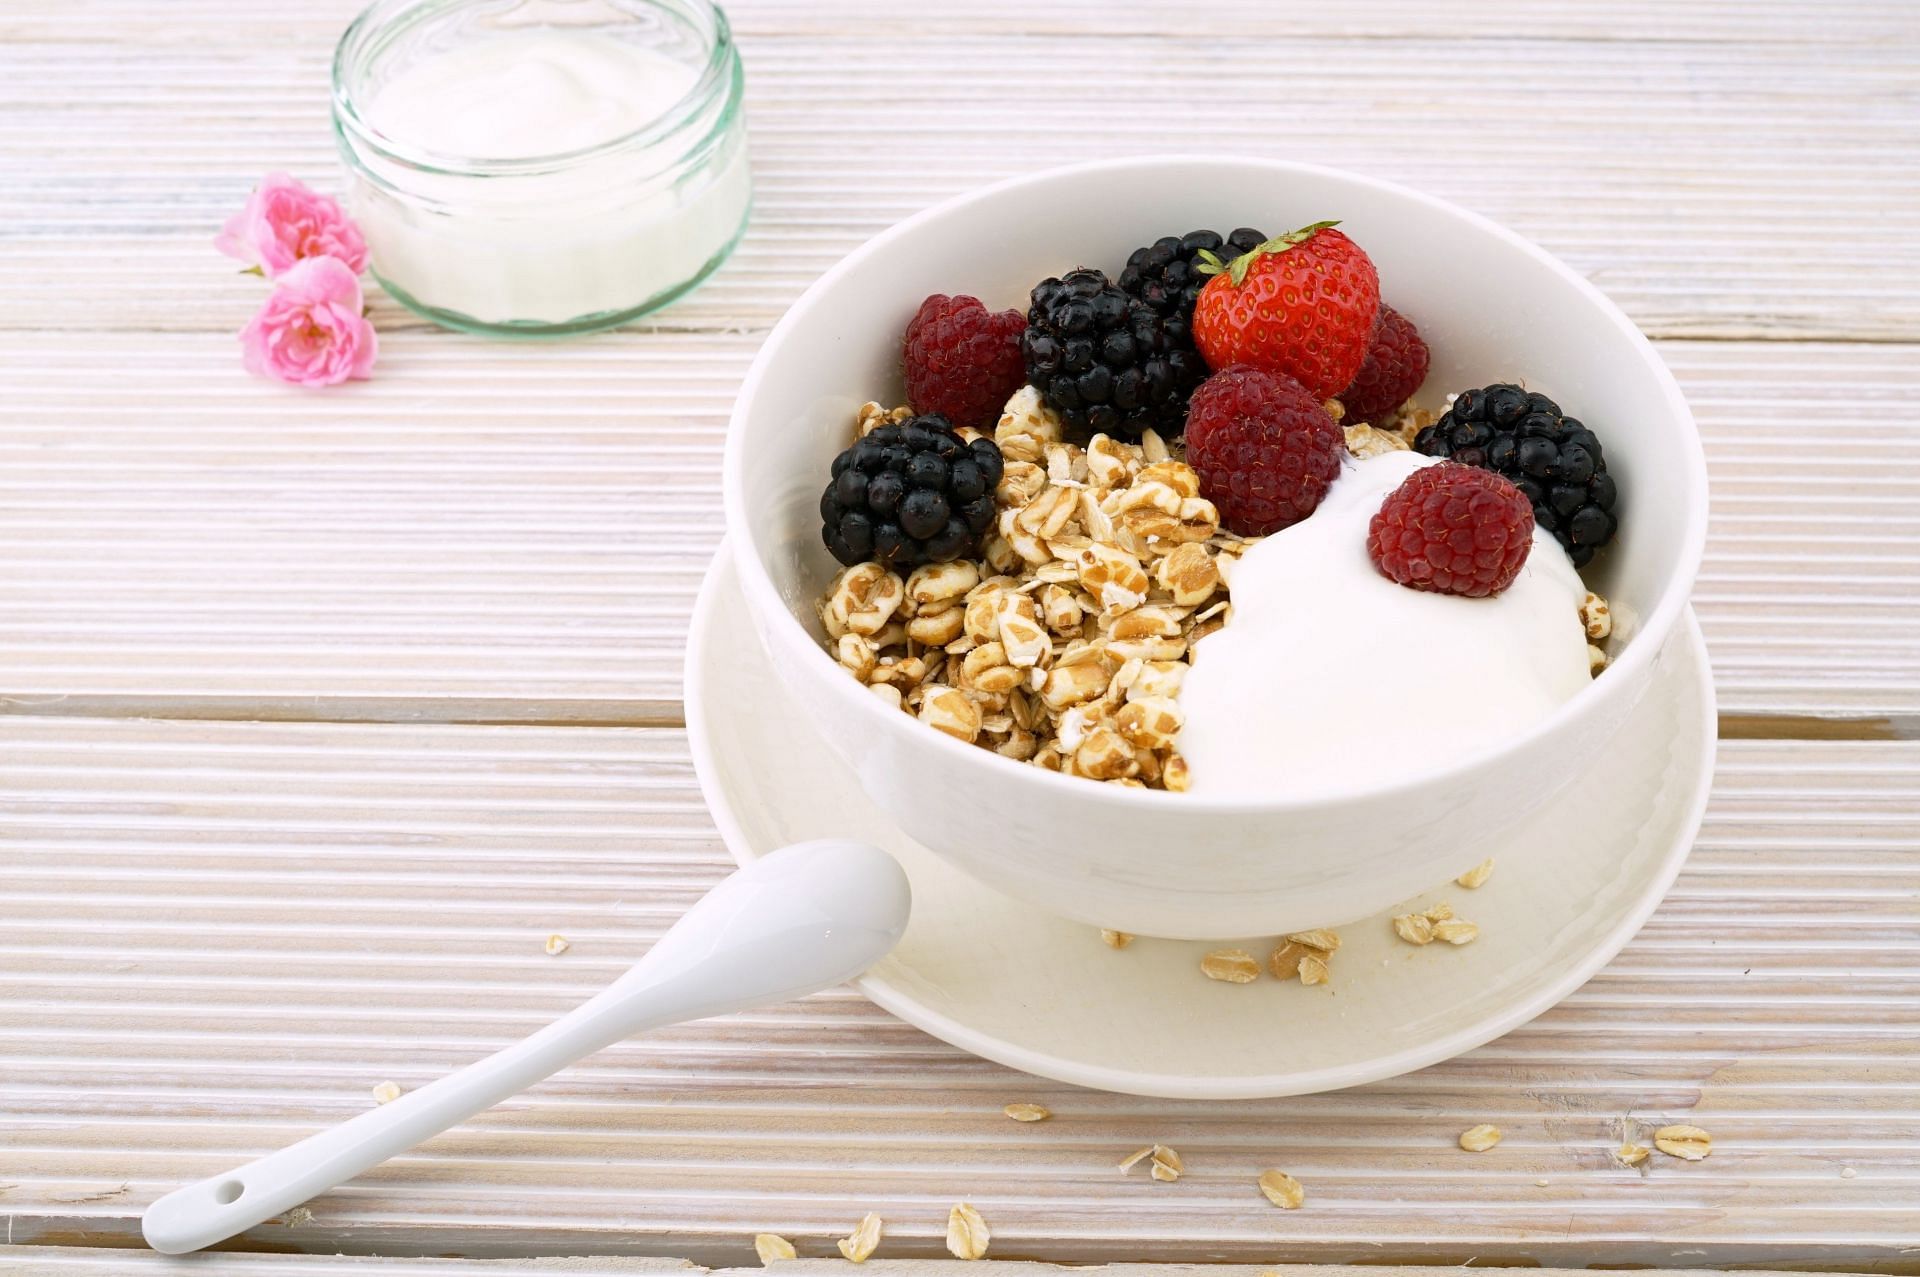 Sweetened yoghurts as worst foods for inflammation (image sourced via Pexels / Photo by Life of pix)